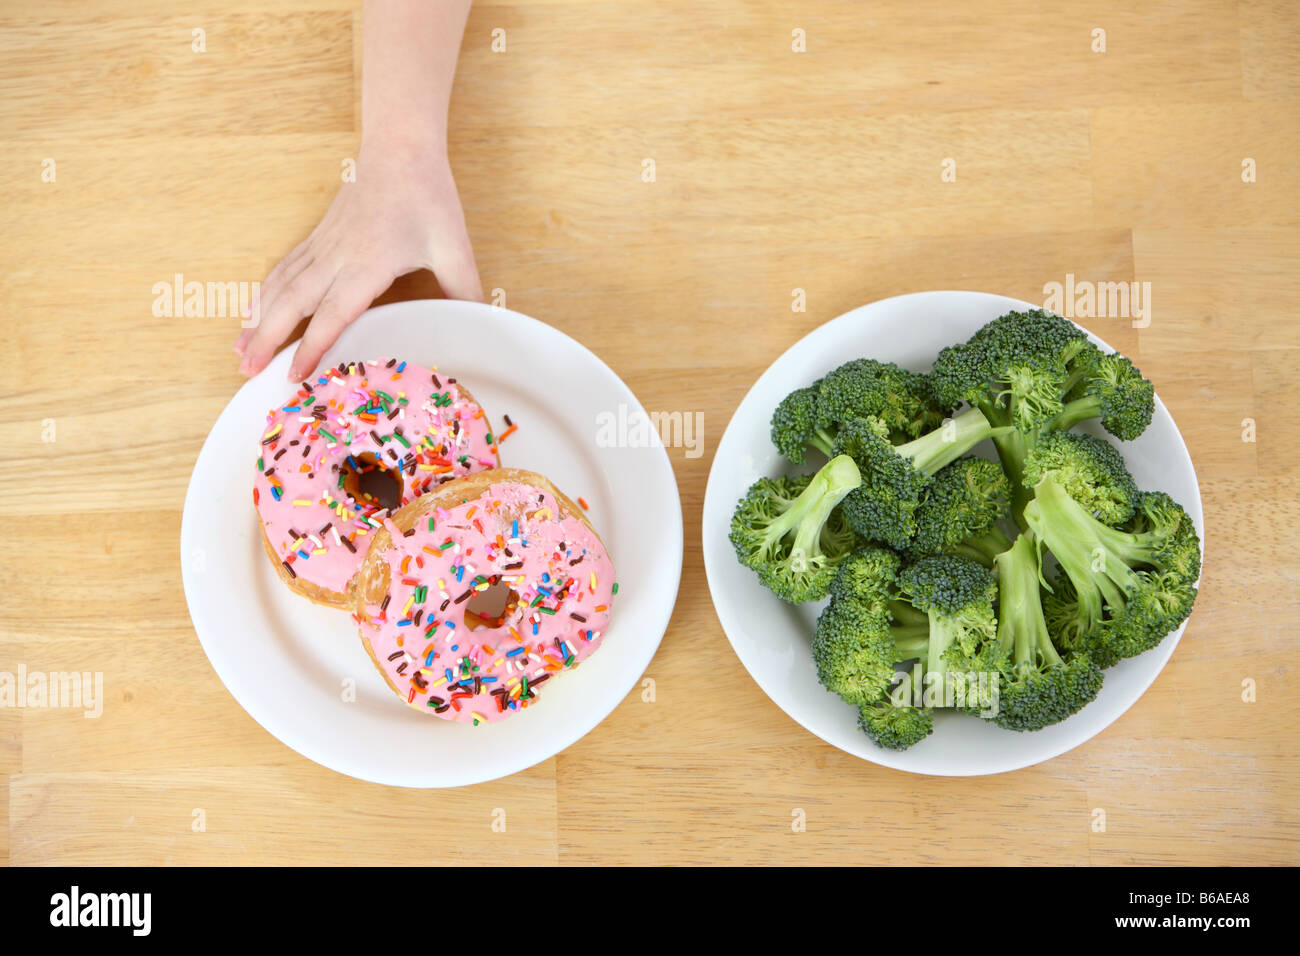 Child's hand reaching for doughnuts rather than broccoli Stock Photo